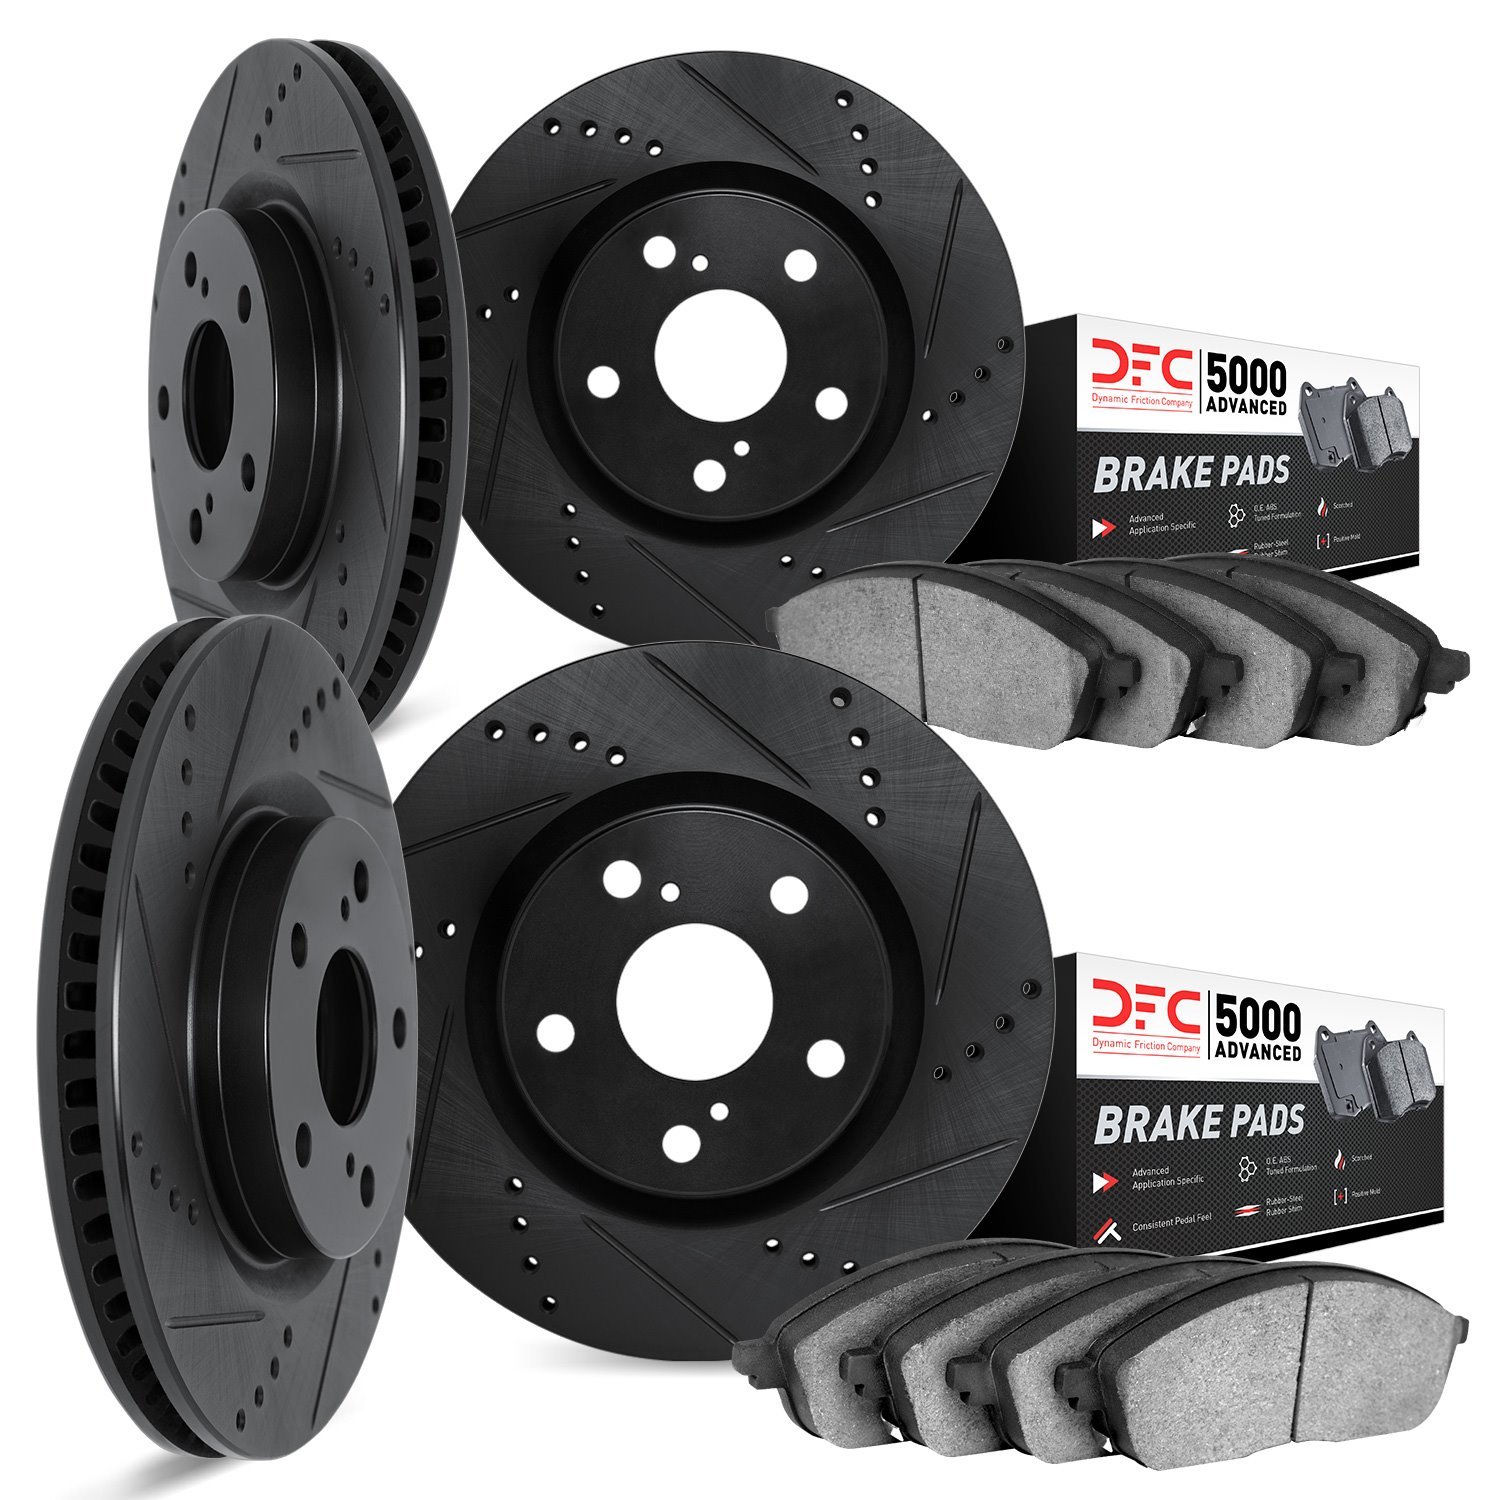 8504-42055 Drilled/Slotted Brake Rotors w/5000 Advanced Brake Pads Kit [Black], Fits Select Mopar, Position: Front and Rear